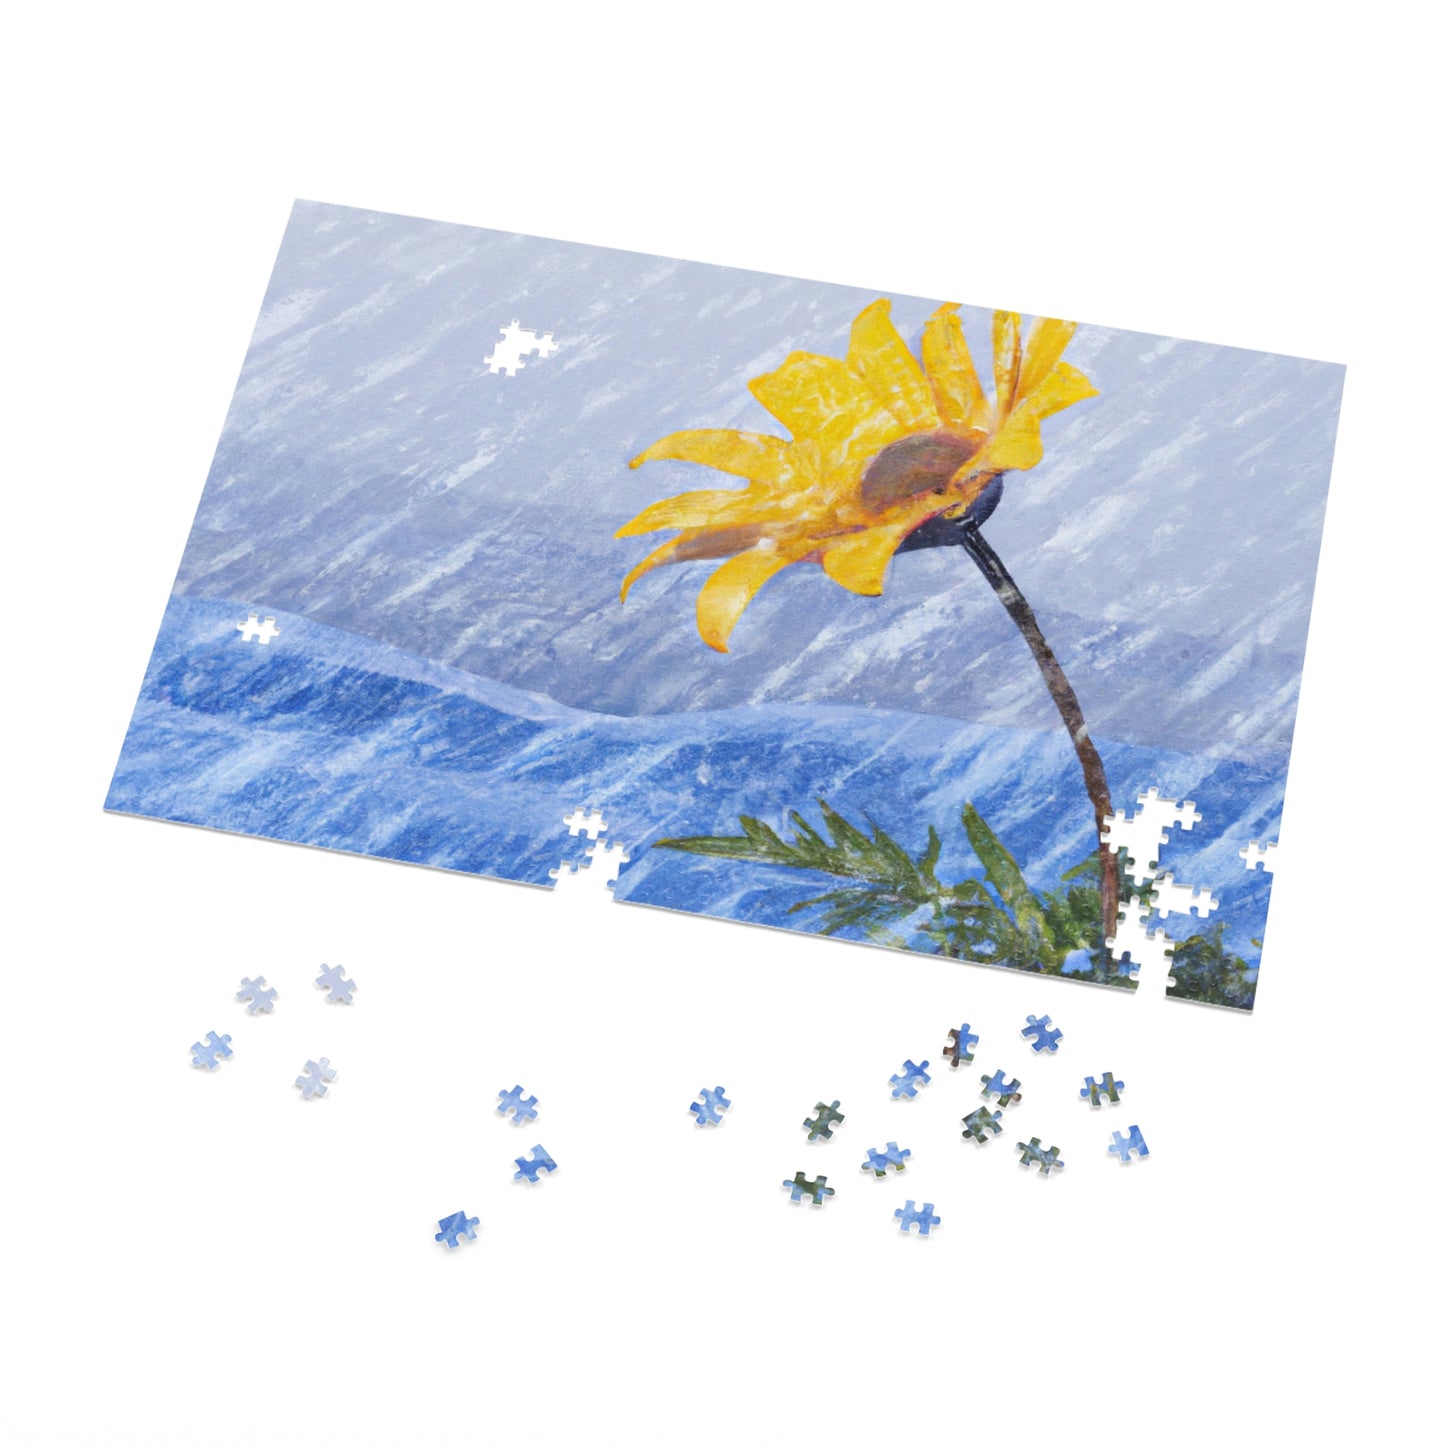 "A Burst of Color in the Glistening White: The Miracle of a Flower Blooms in a Snowstorm" - The Alien Jigsaw Puzzle